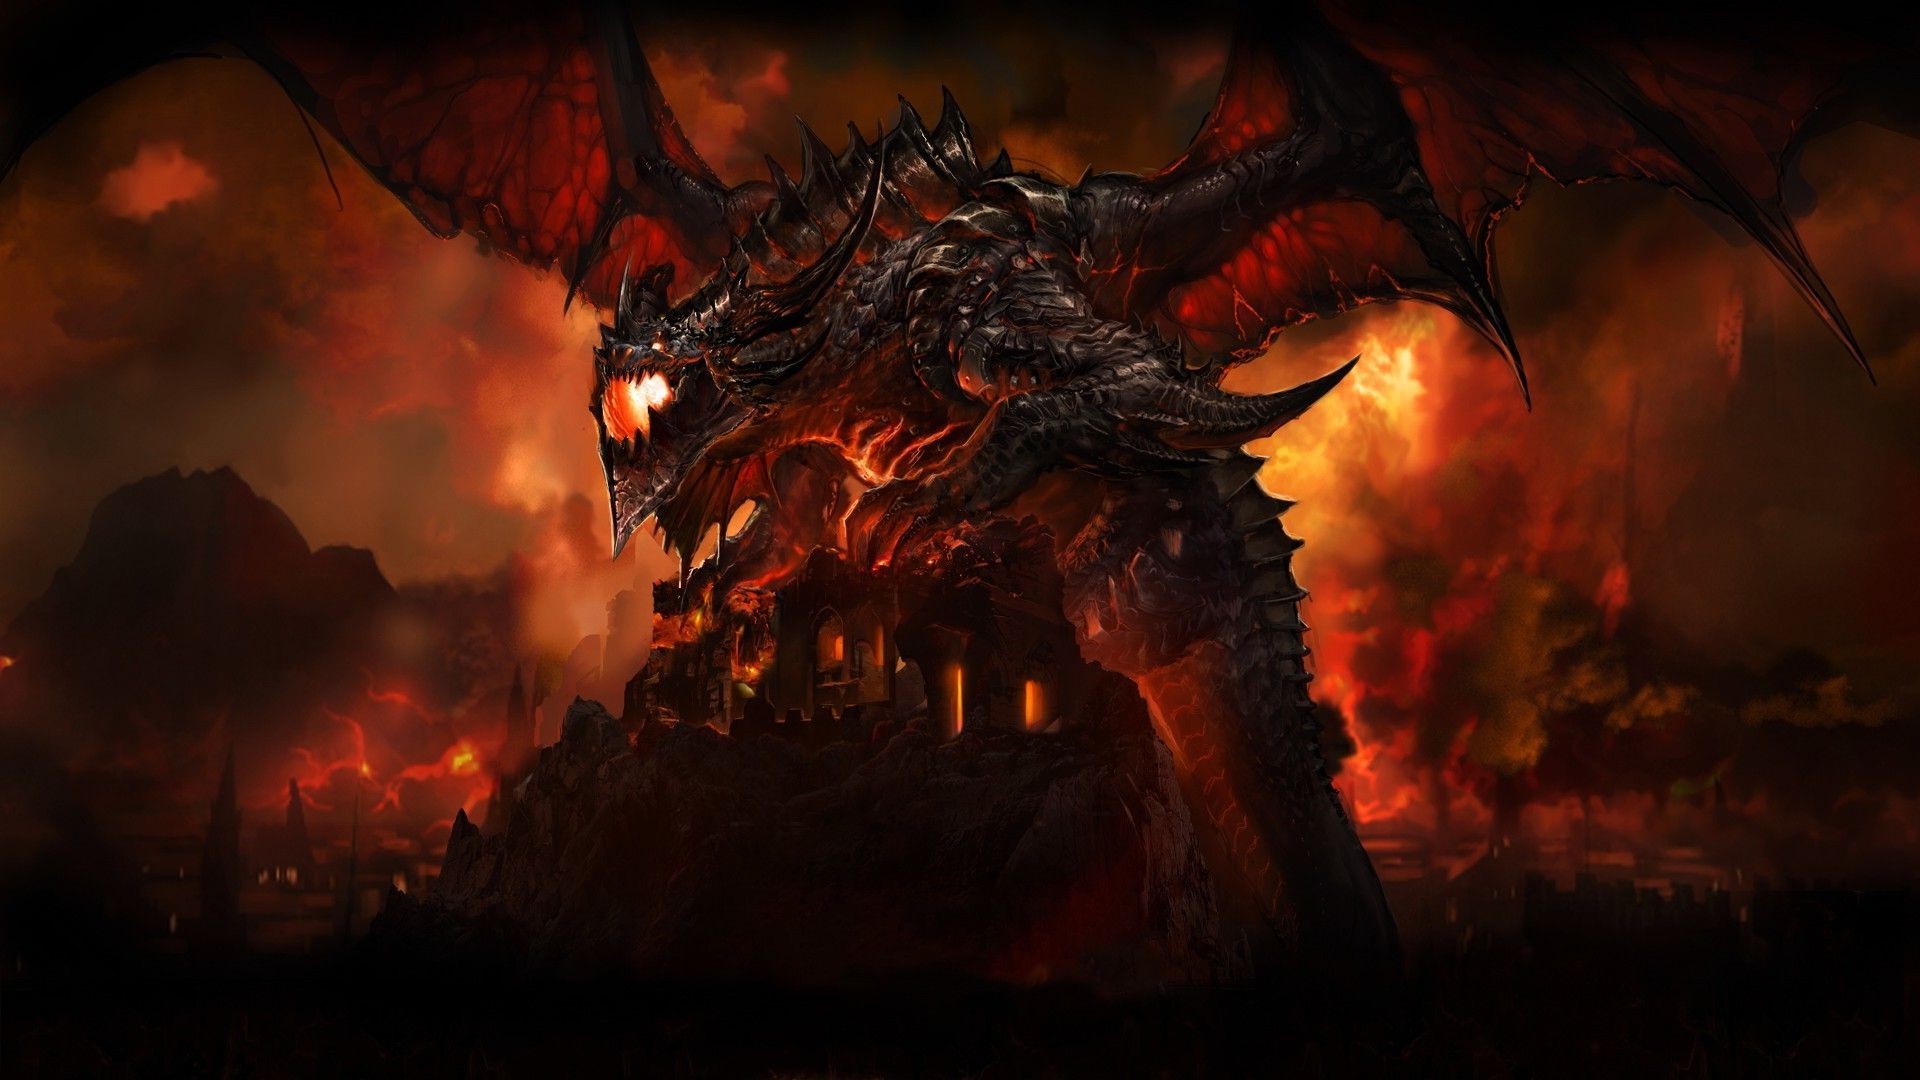 World Of Warcraft: Cataclysm Wallpapers